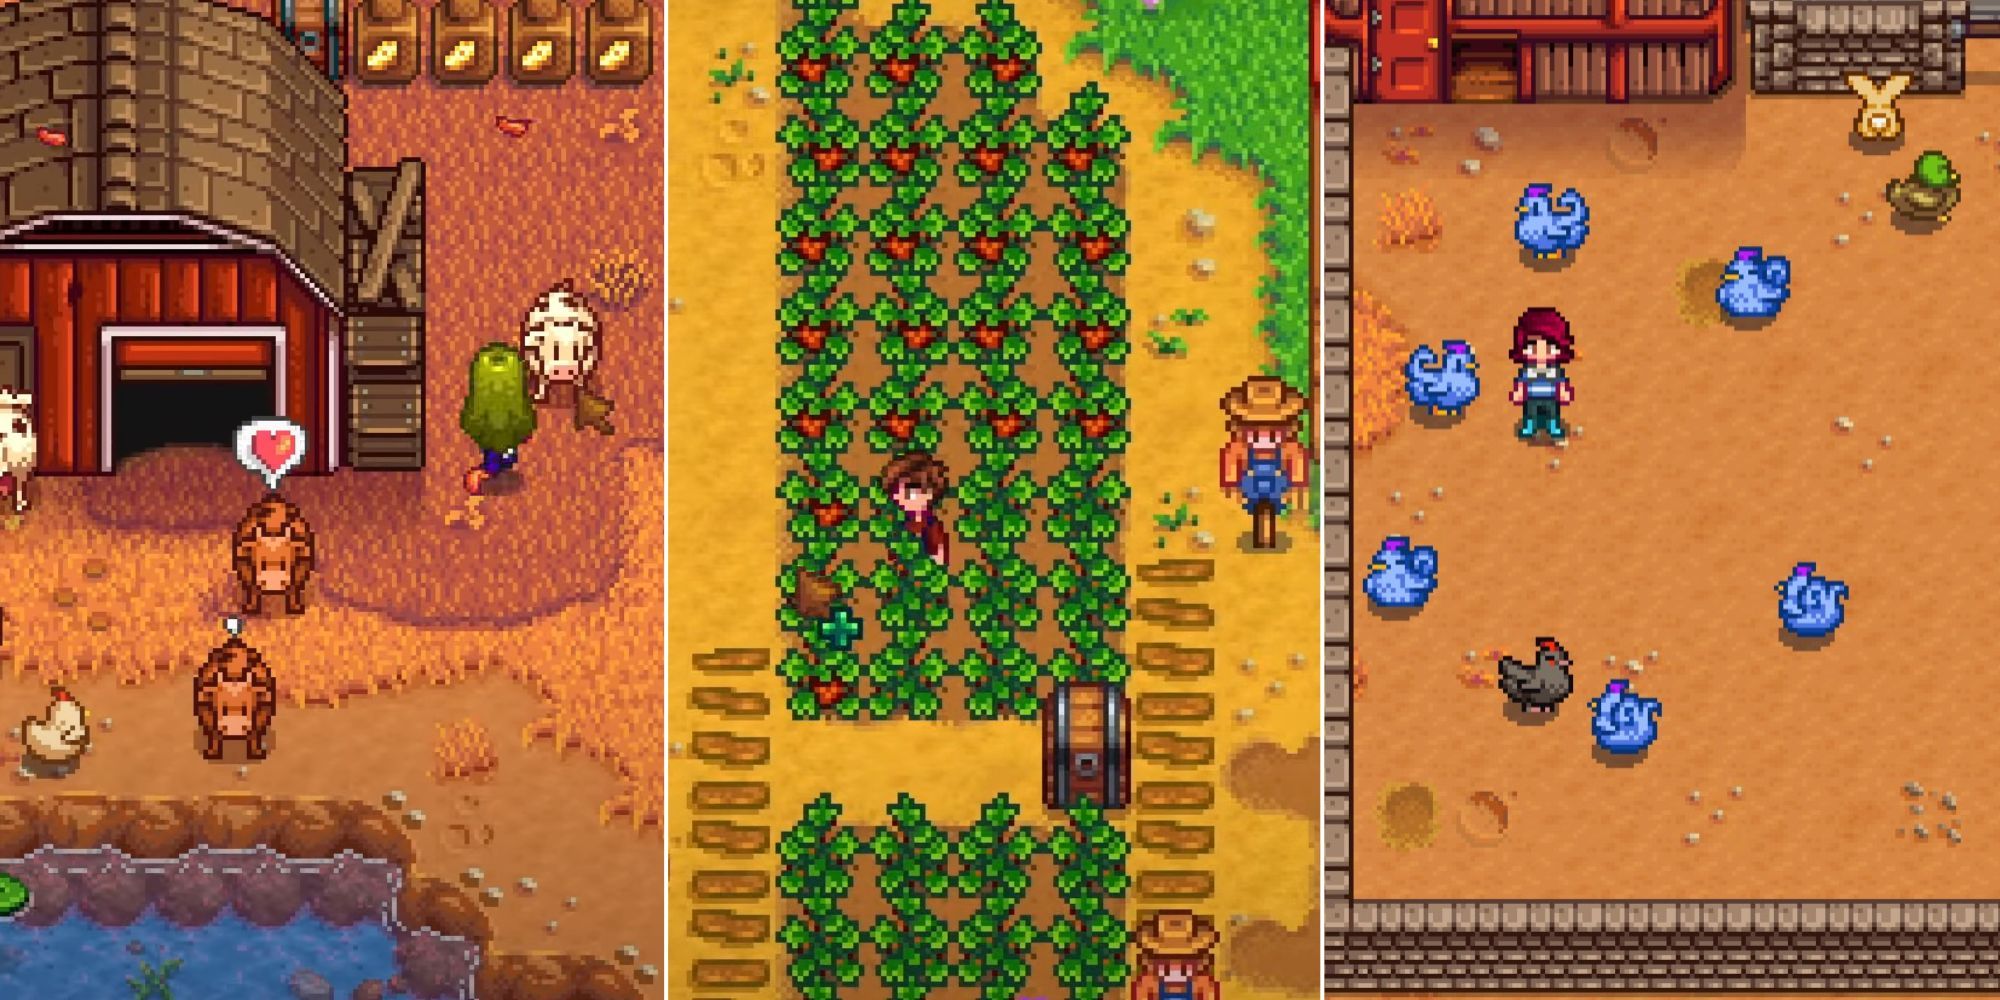 Stardew Valley player milking cows, picking strawberries, and petting blue chickens